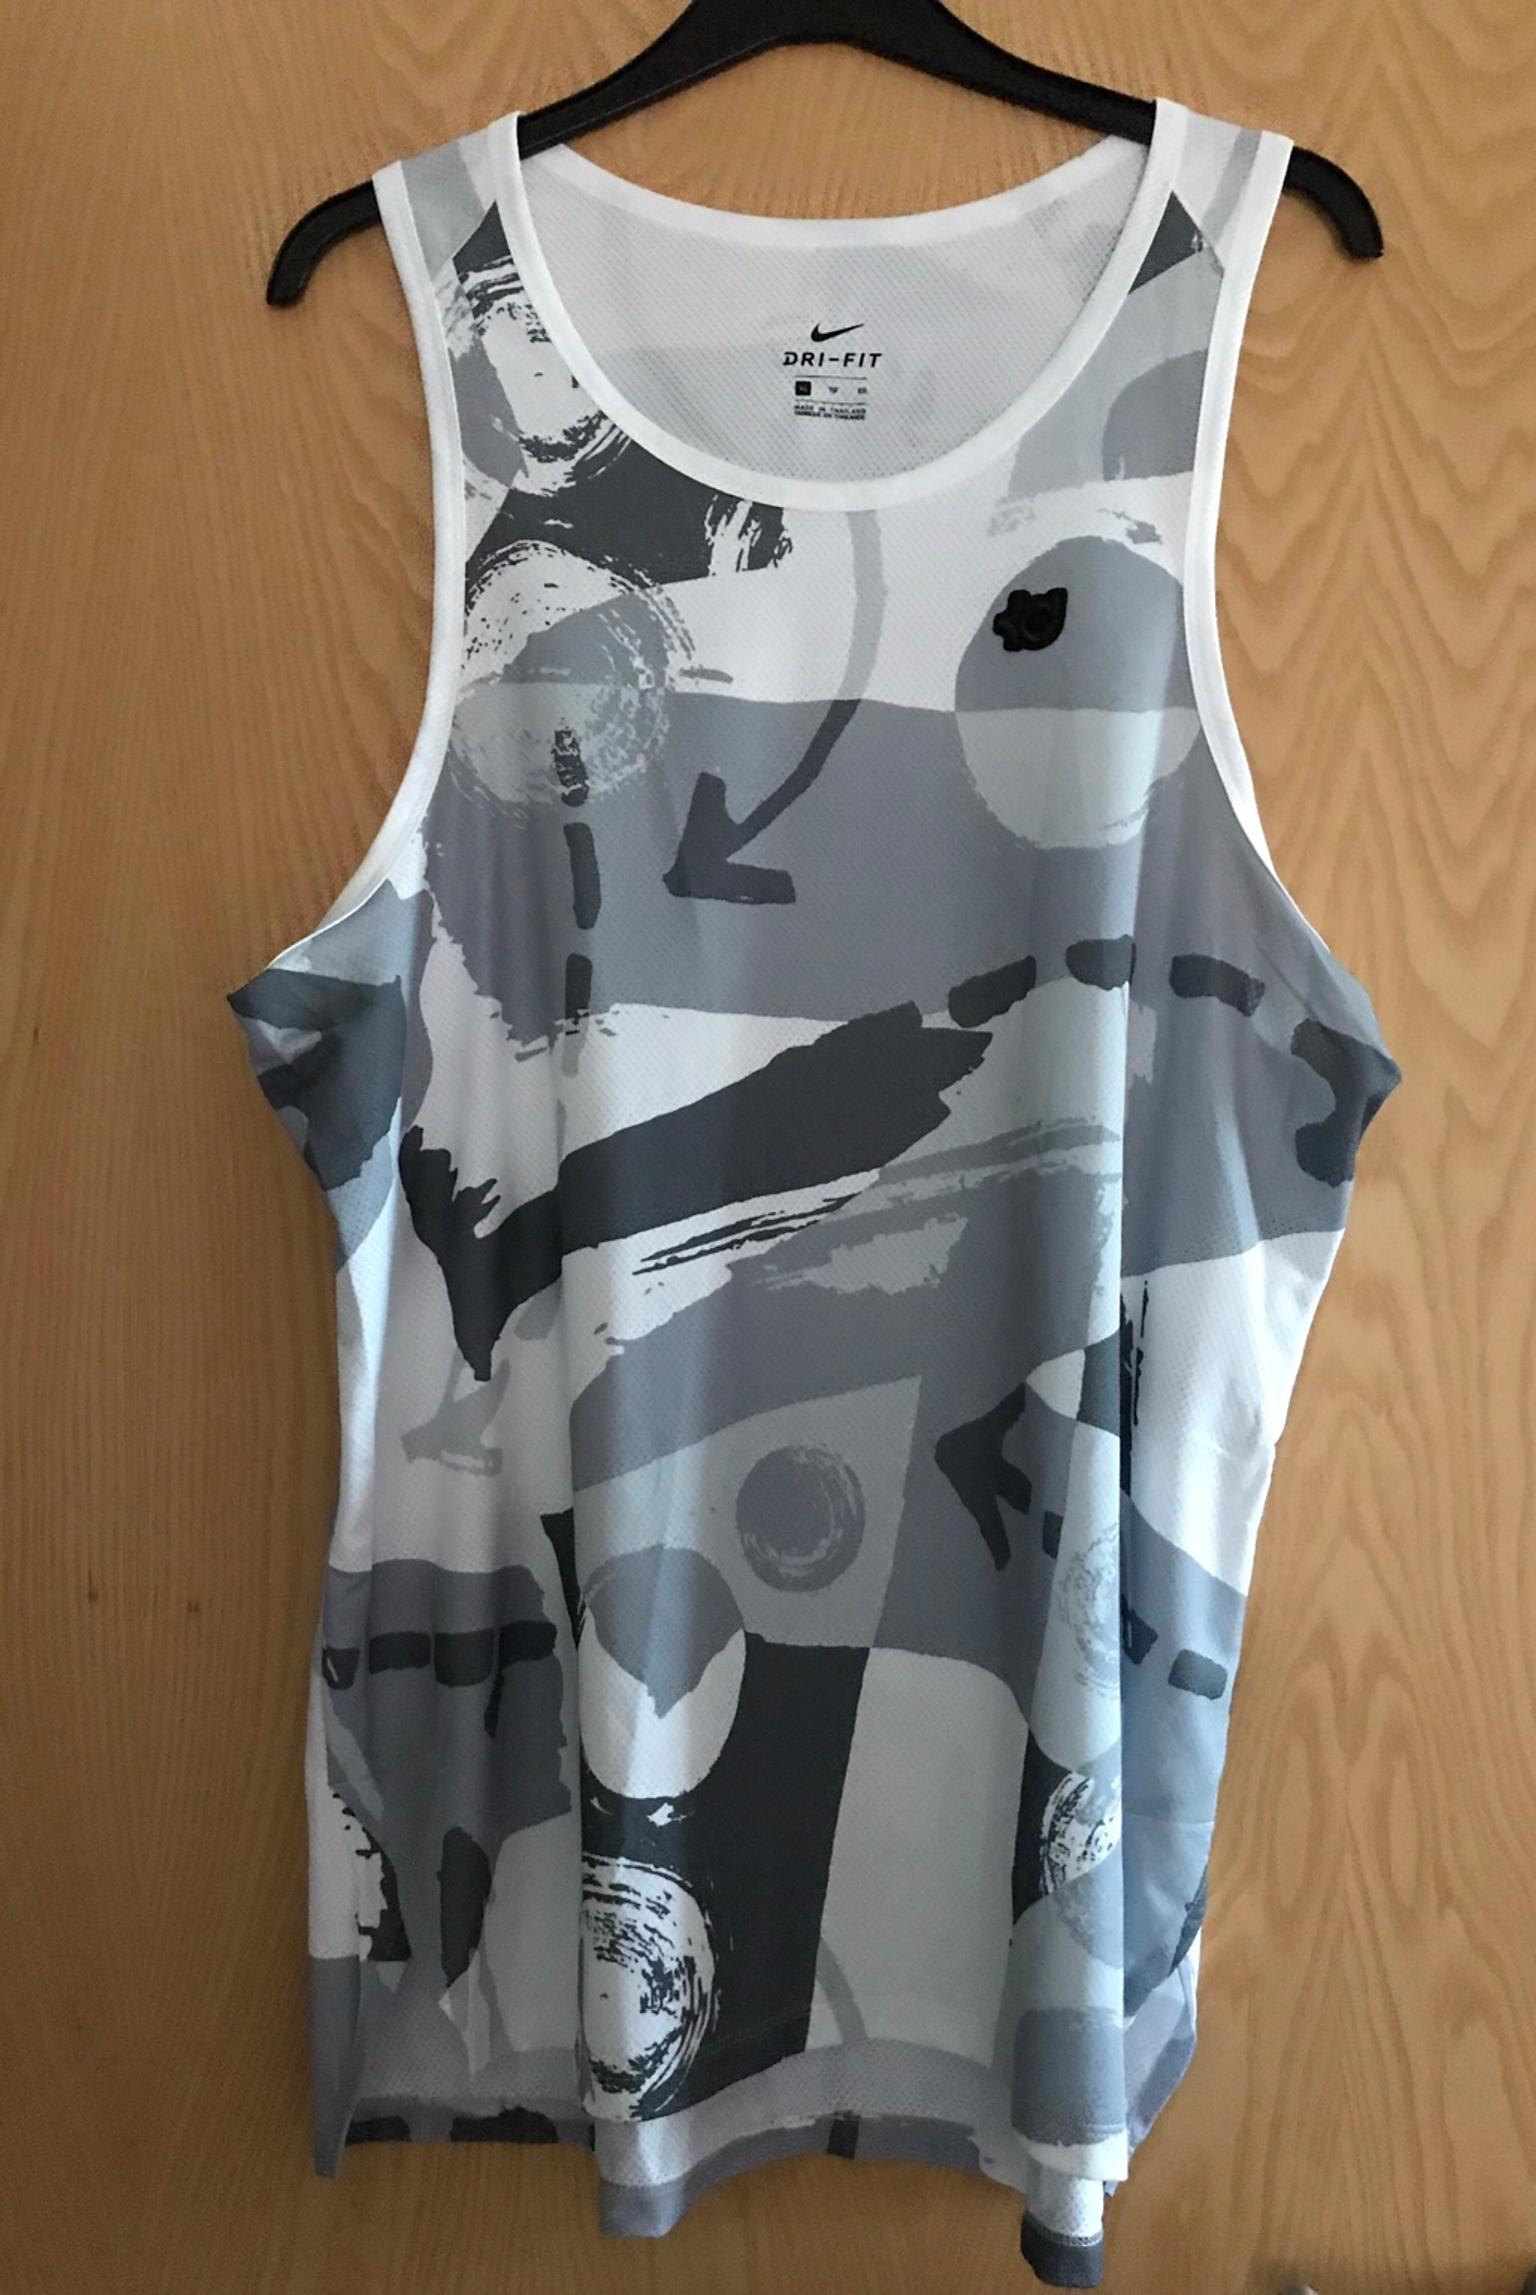 Nike Vest In Ct19 Hythe For 10 00 For Sale Shpock